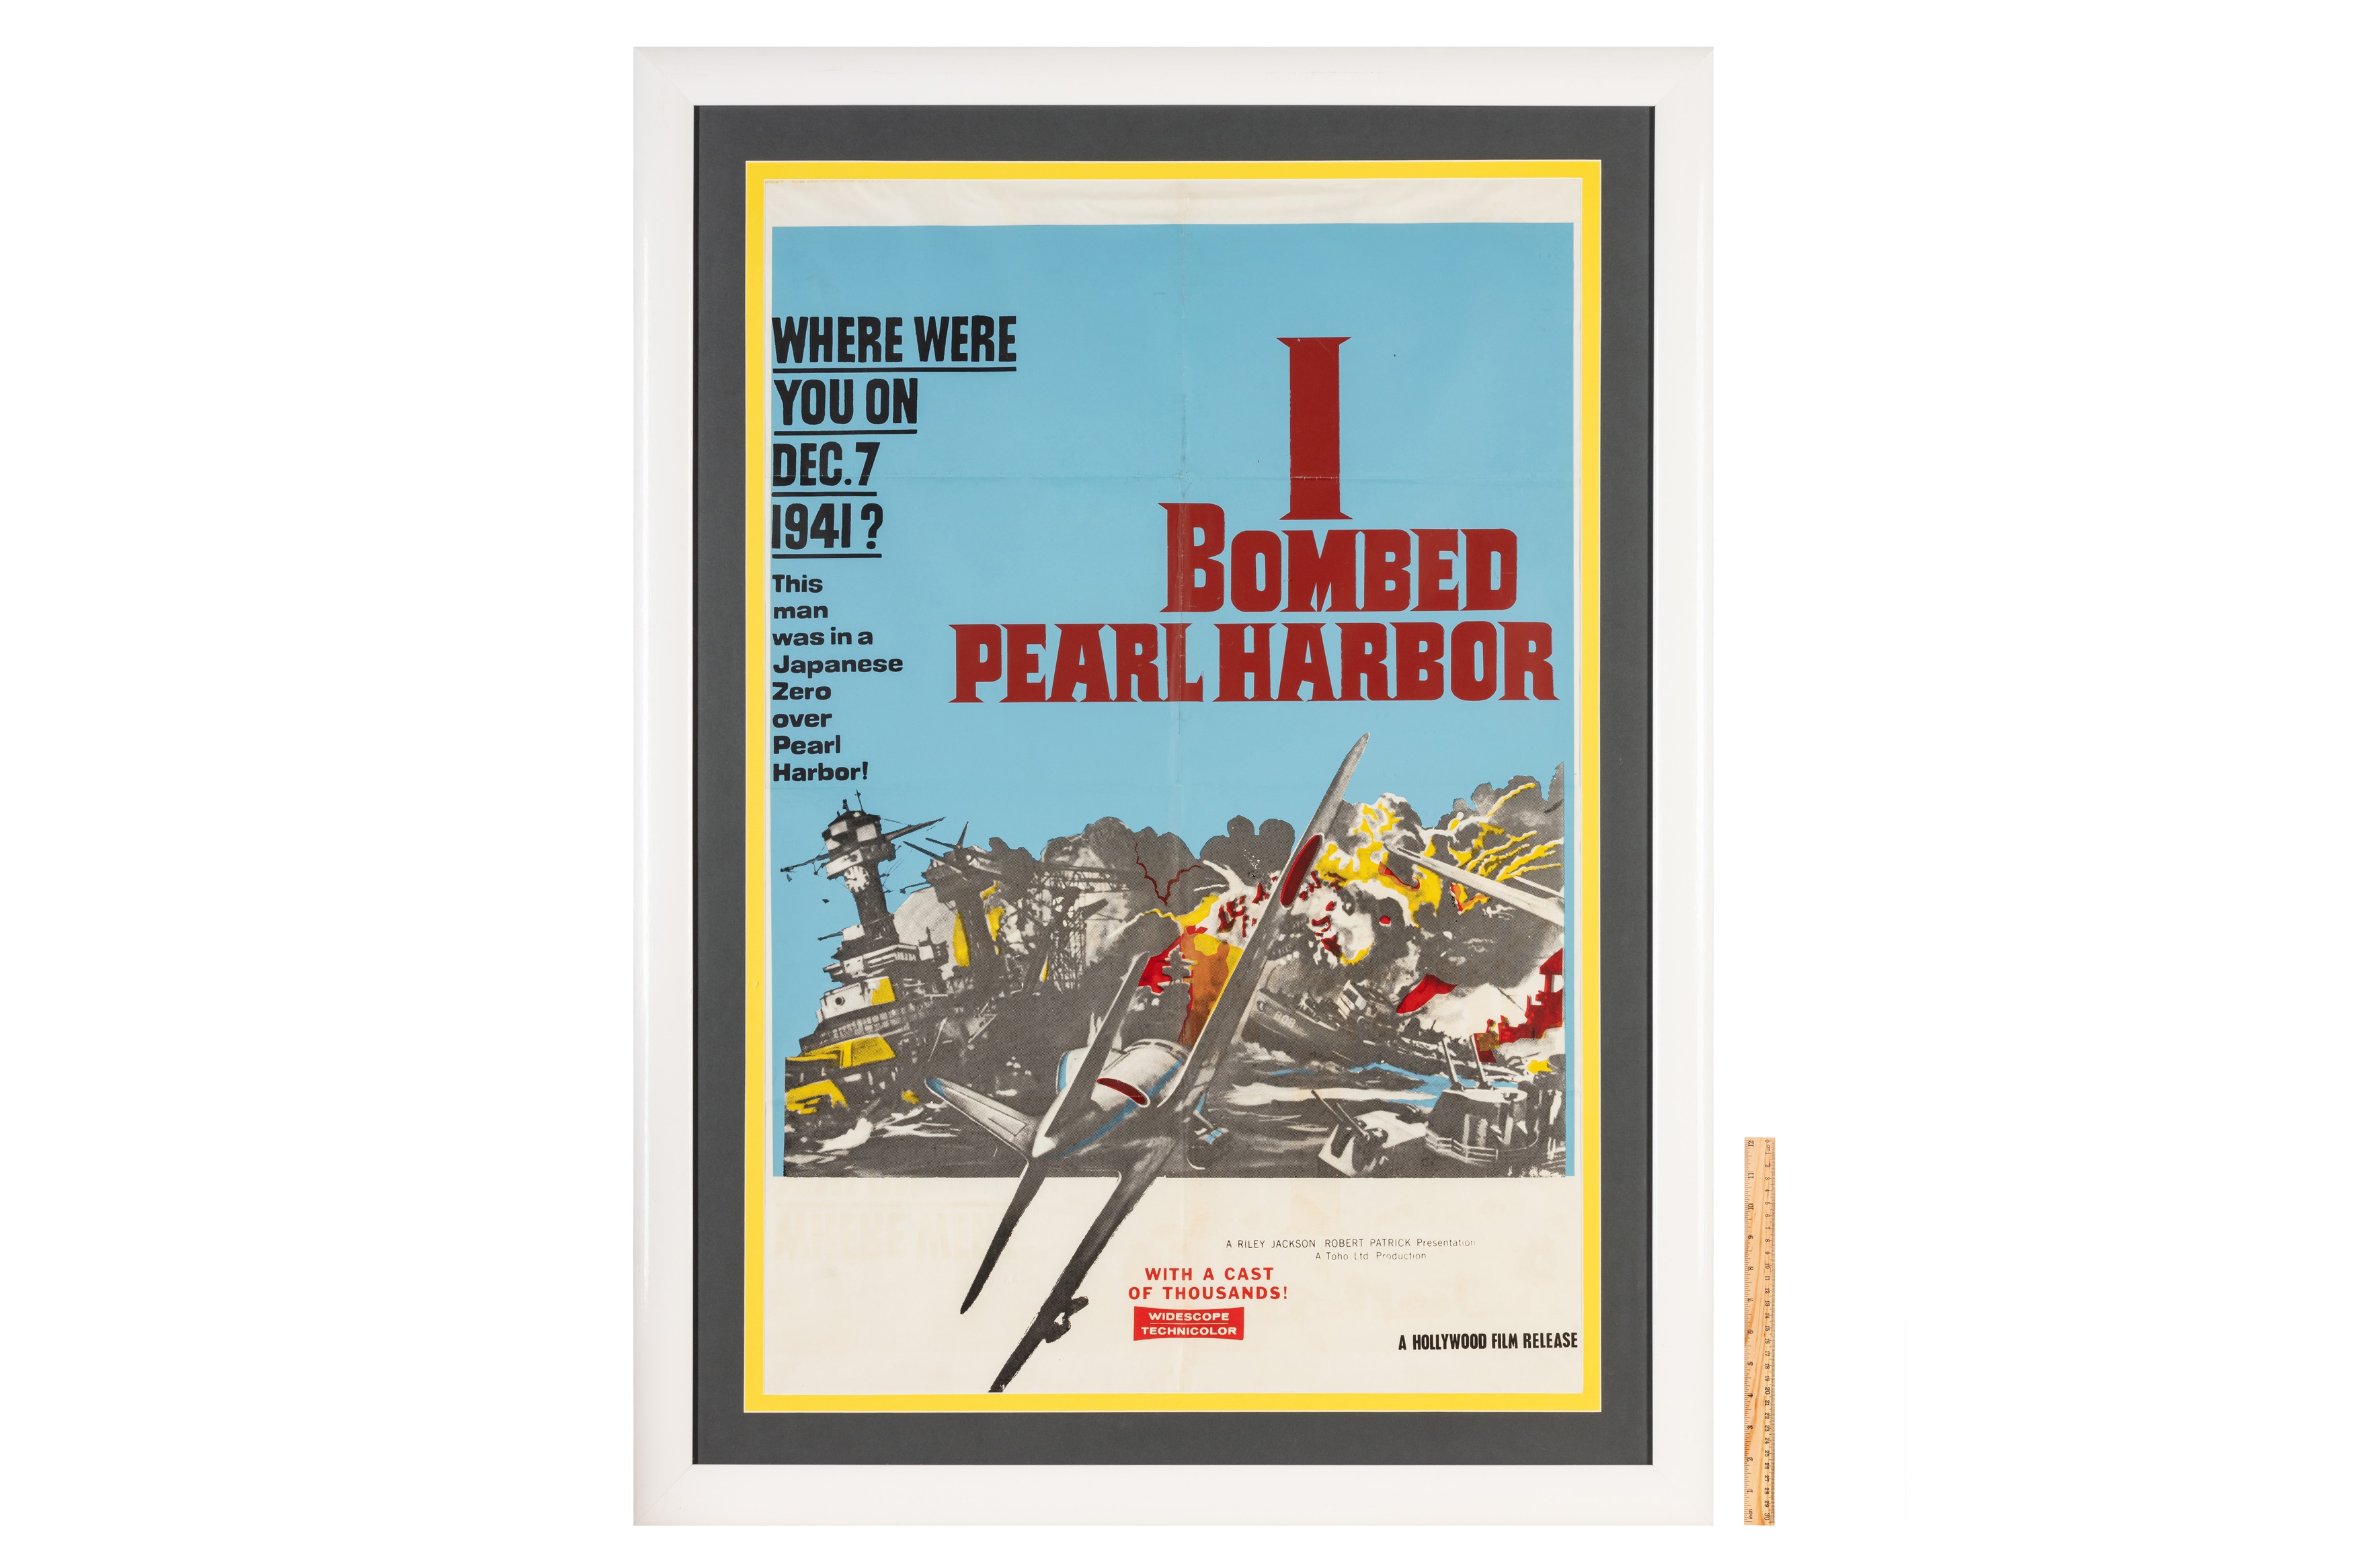 A COLLECTION OF FRAMED VINTAGE MOVIE POSTERS - Image 10 of 12